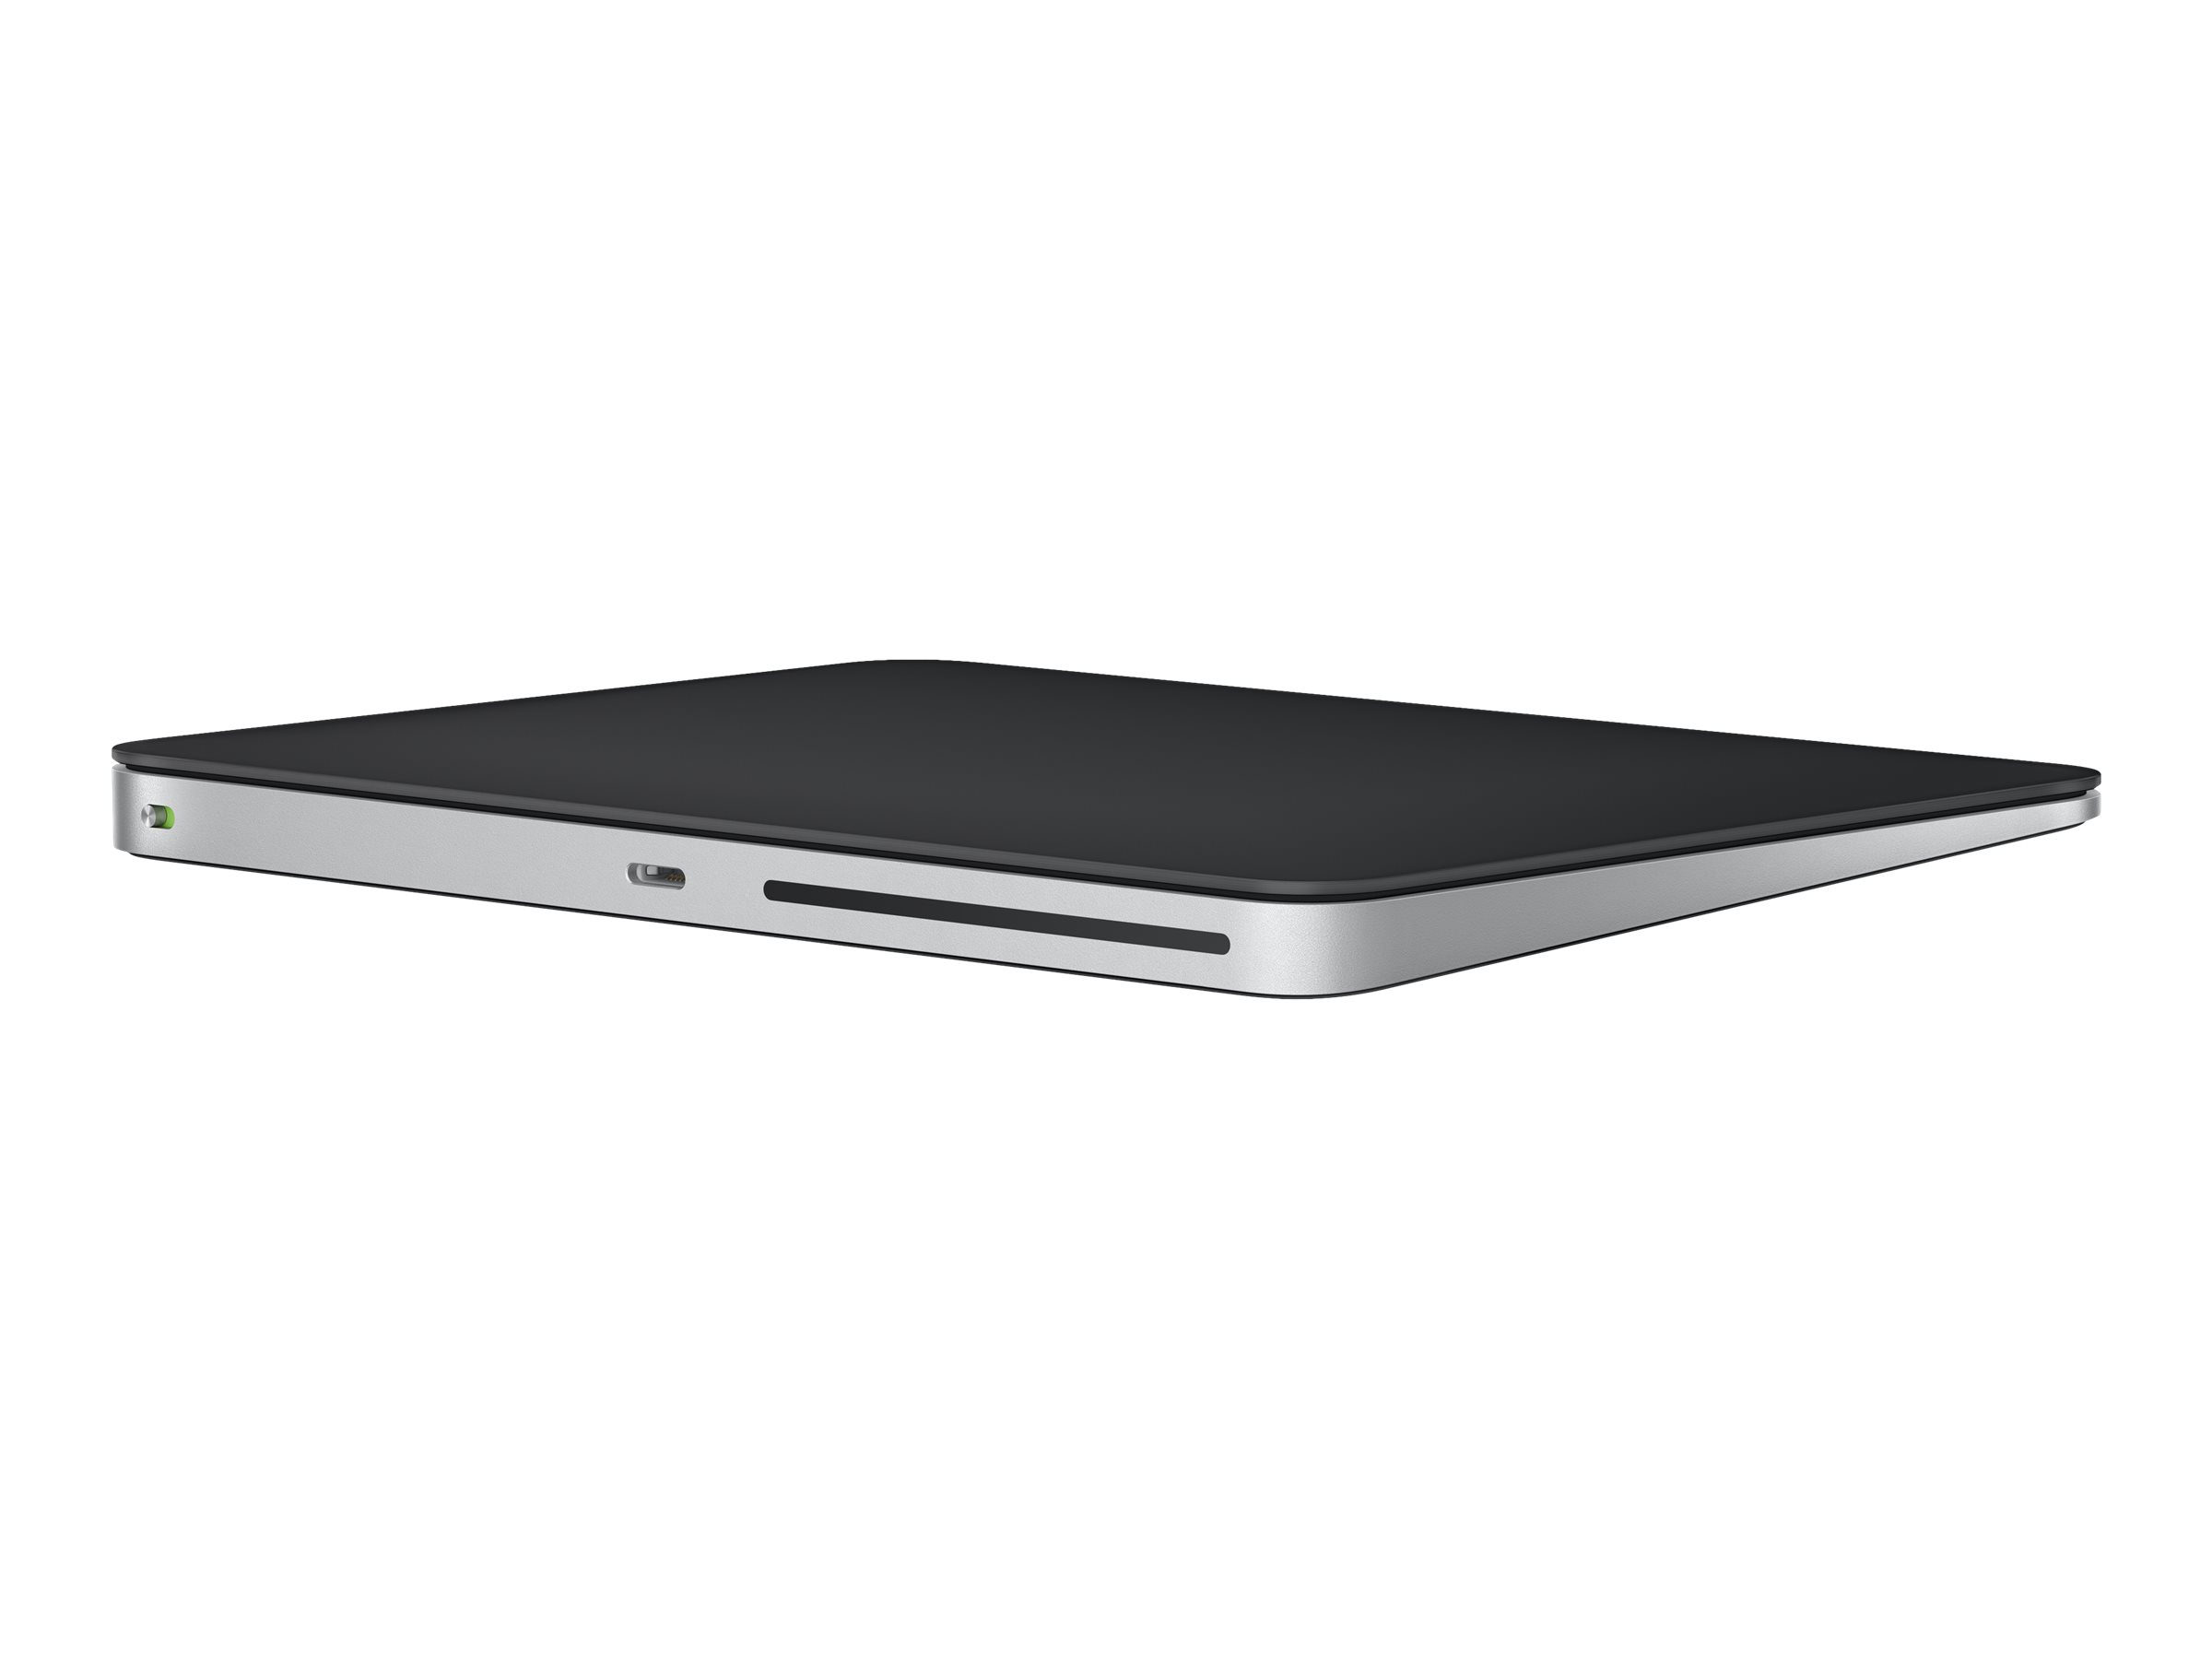 Magic Trackpad black multi touch surface